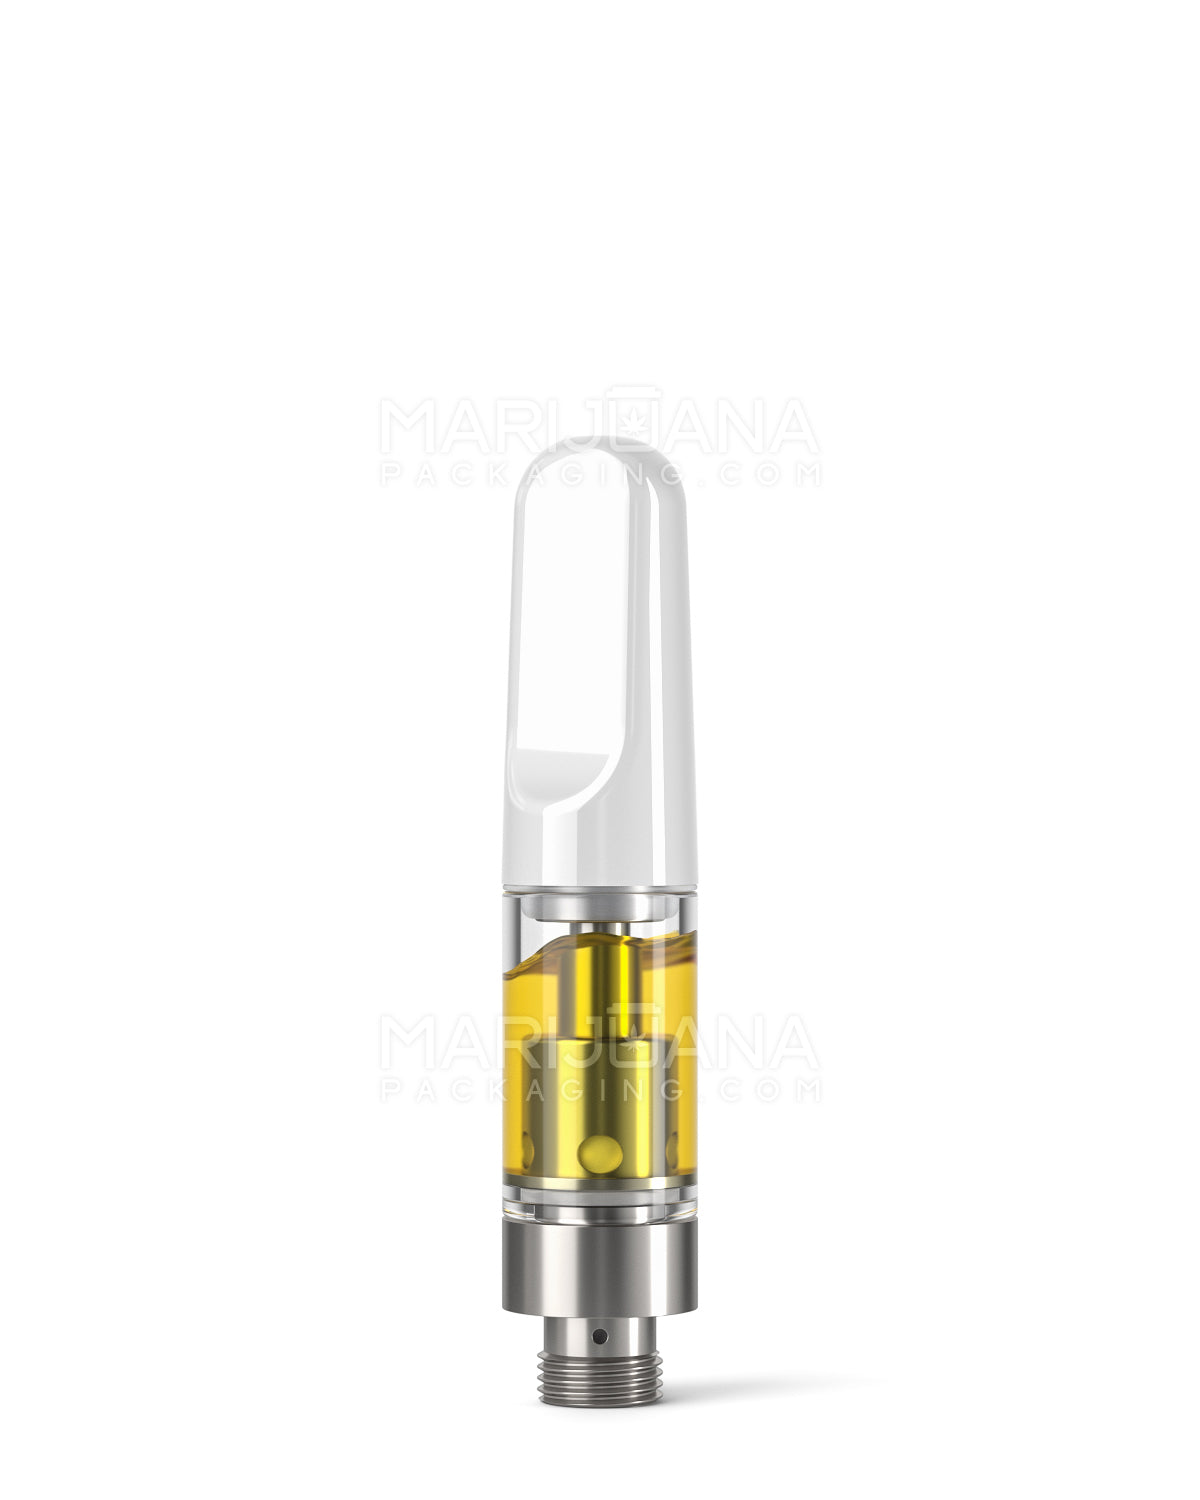 CCELL | Liquid6 Reactor Glass Vape Cartridge with White Ceramic Mouthpiece | 0.5mL - Screw On - 100 Count - 2